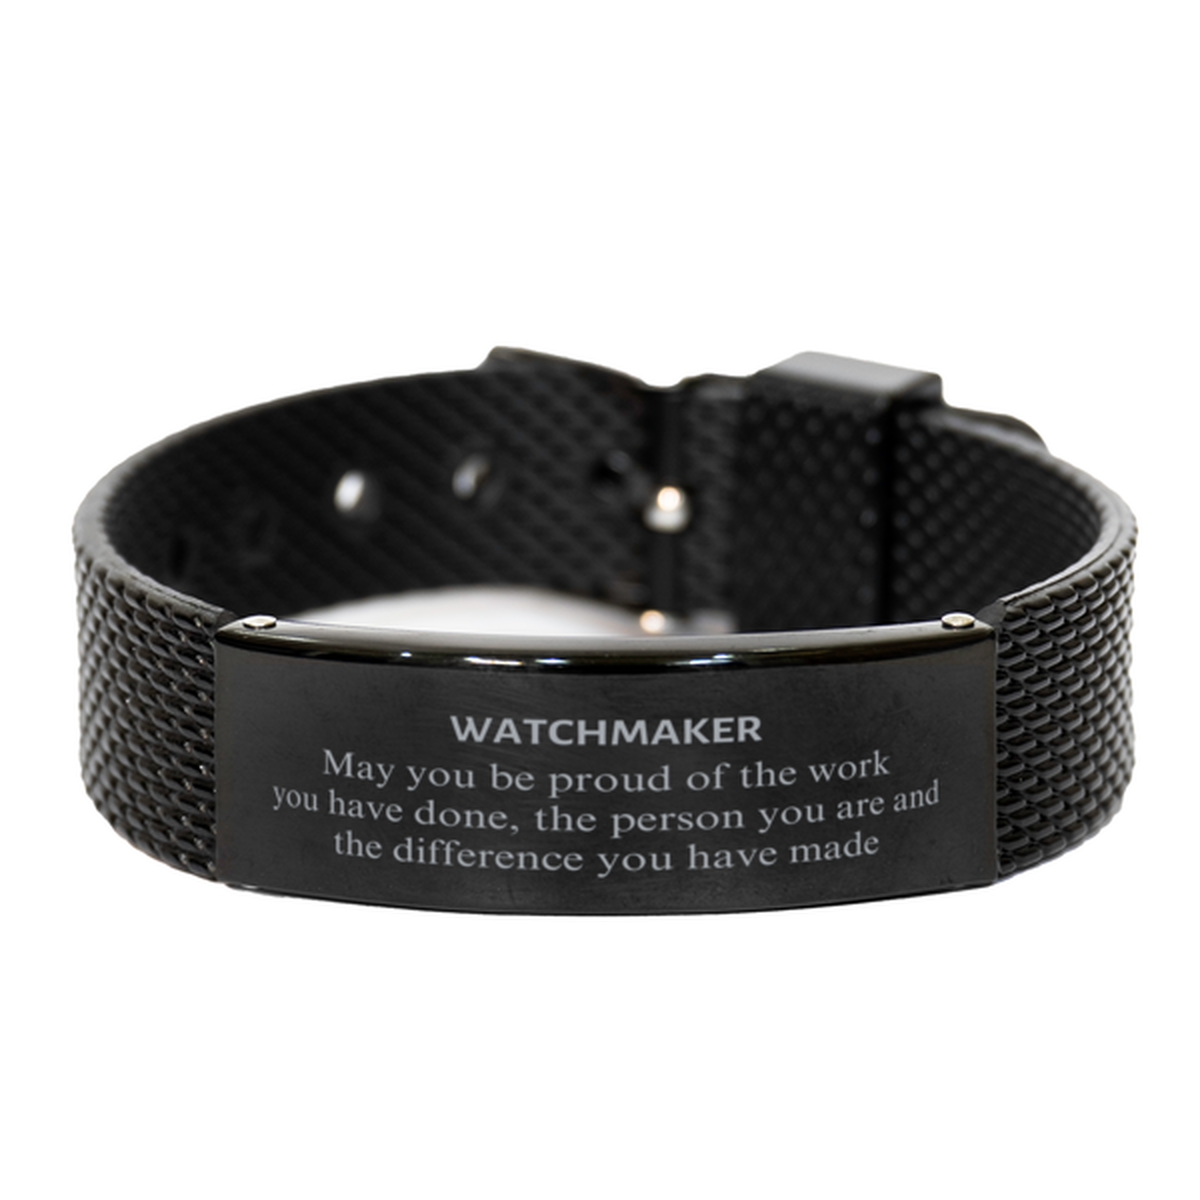 Watchmaker May you be proud of the work you have done, Retirement Watchmaker Black Shark Mesh Bracelet for Colleague Appreciation Gifts Amazing for Watchmaker